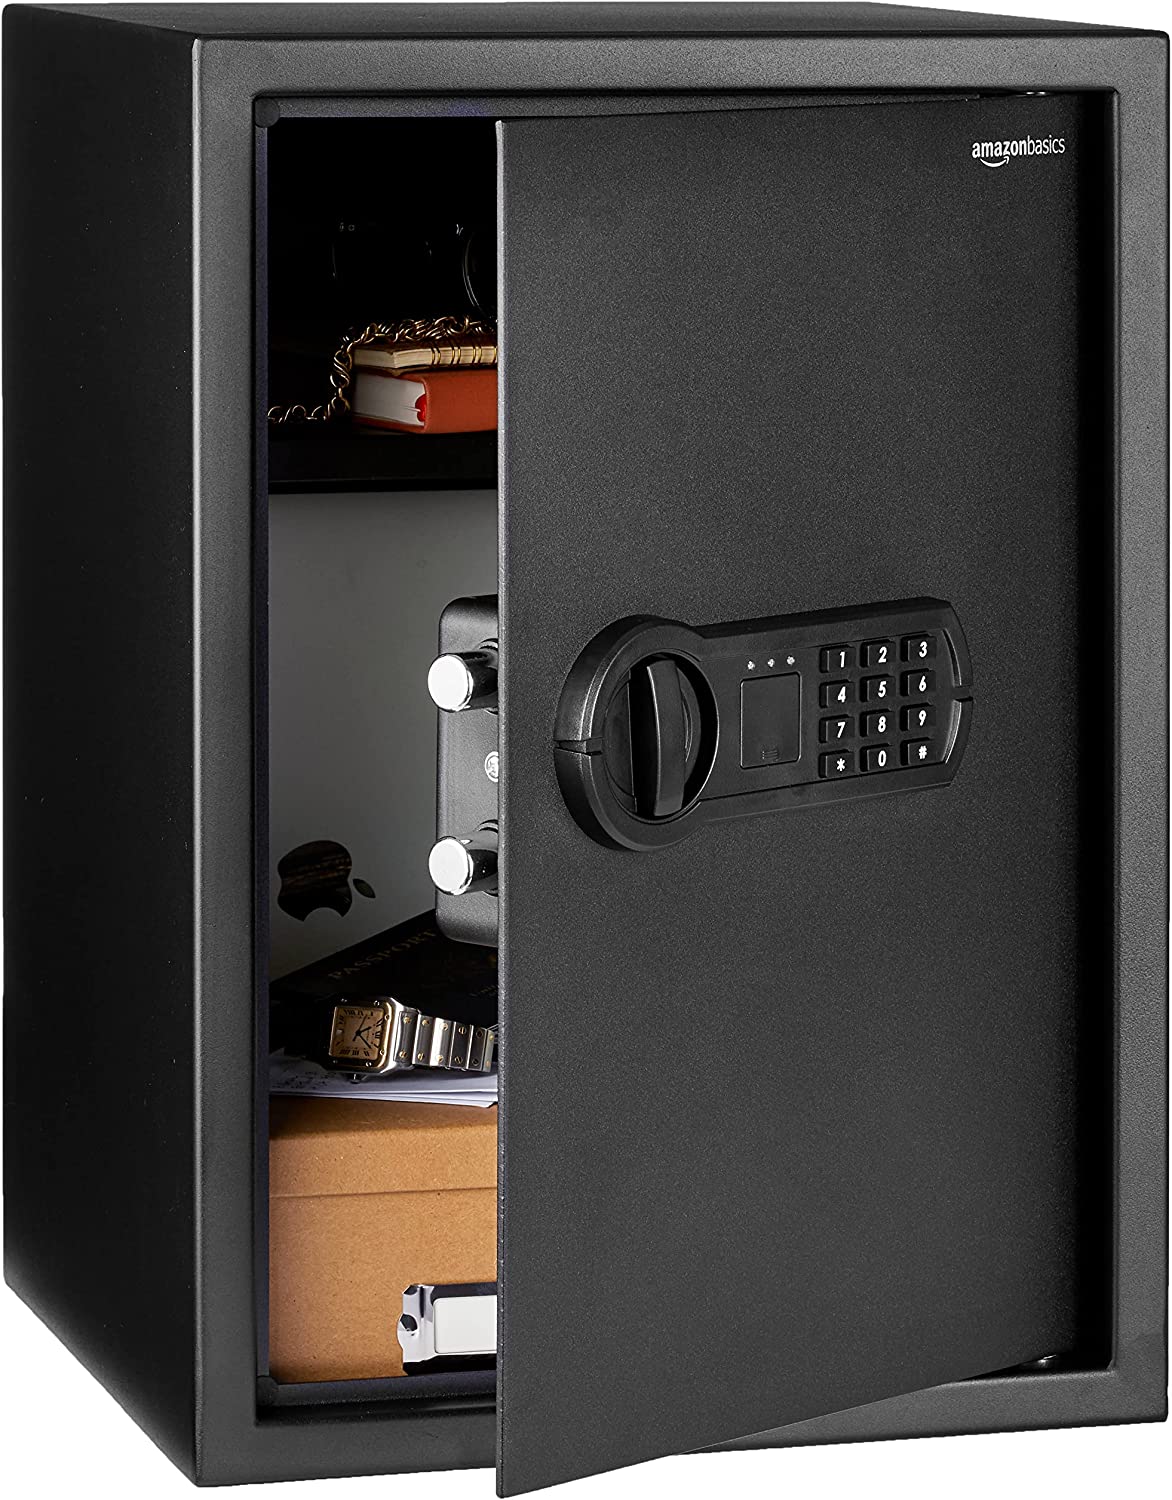 Amazon Basics Steel Home Security Safe with [...]